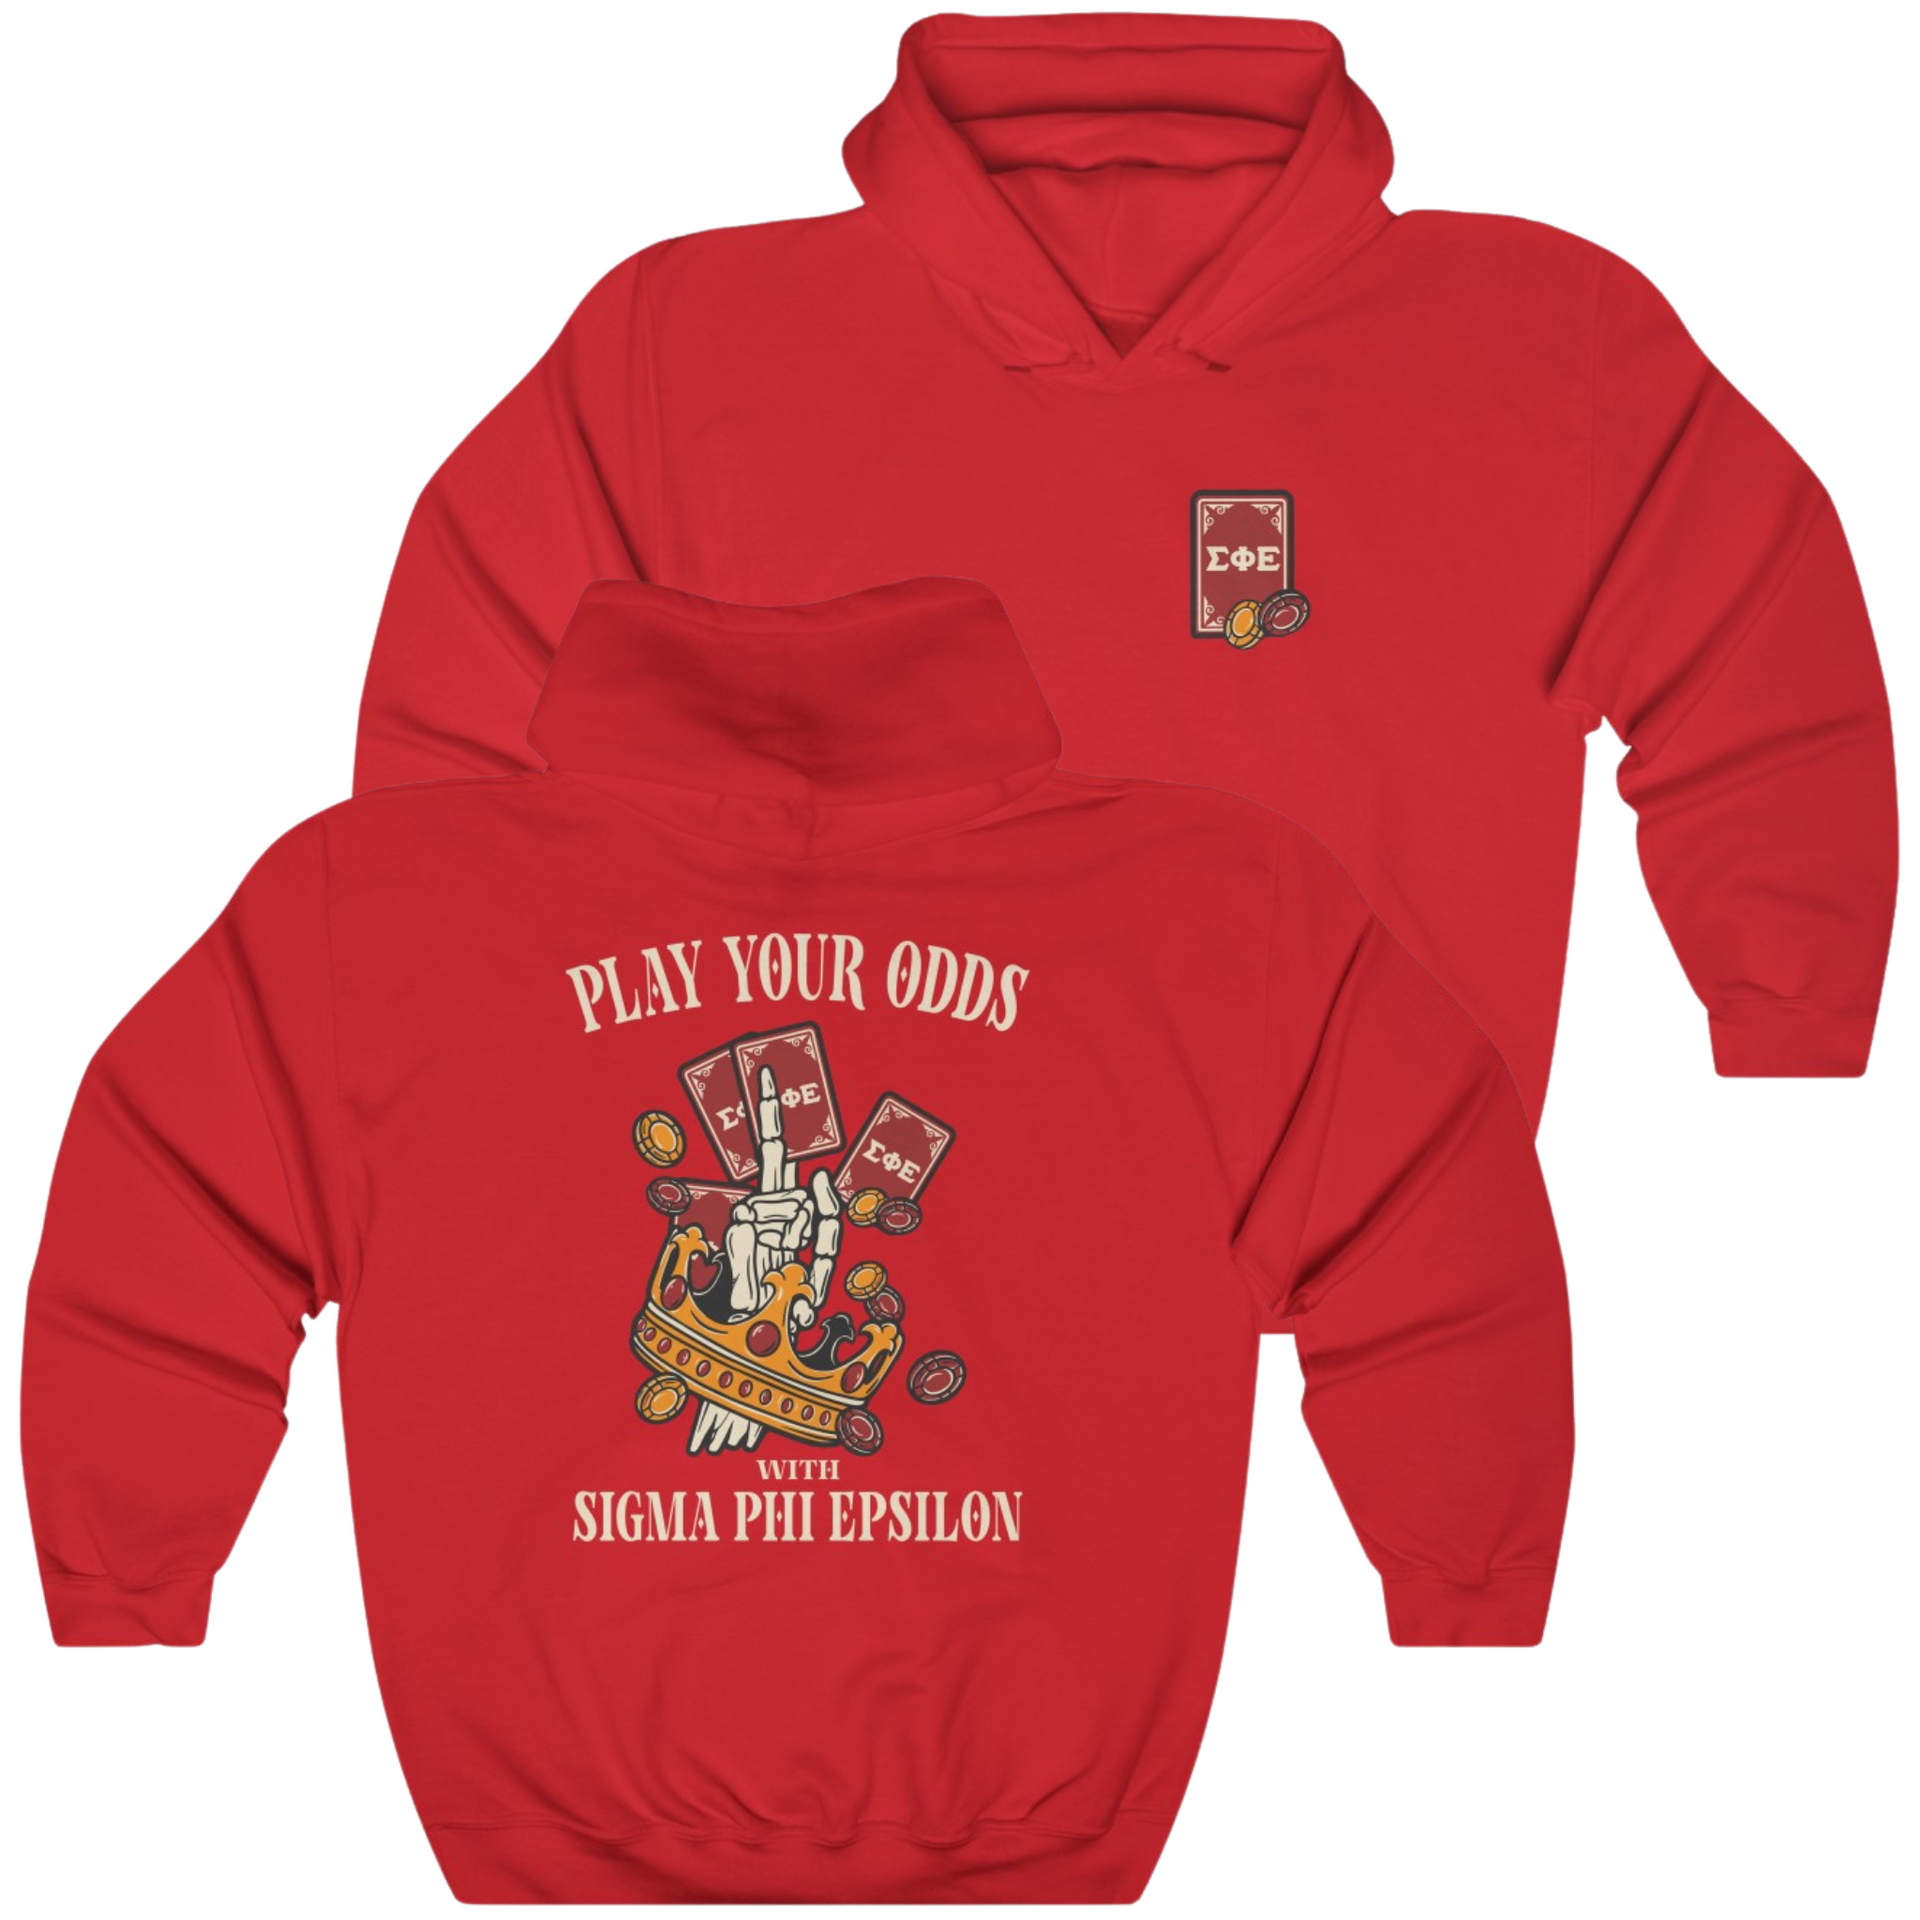 Red Sigma Phi Epsilon Graphic Hoodie | Play Your Odds | SigEp Clothing - Campus Apparel